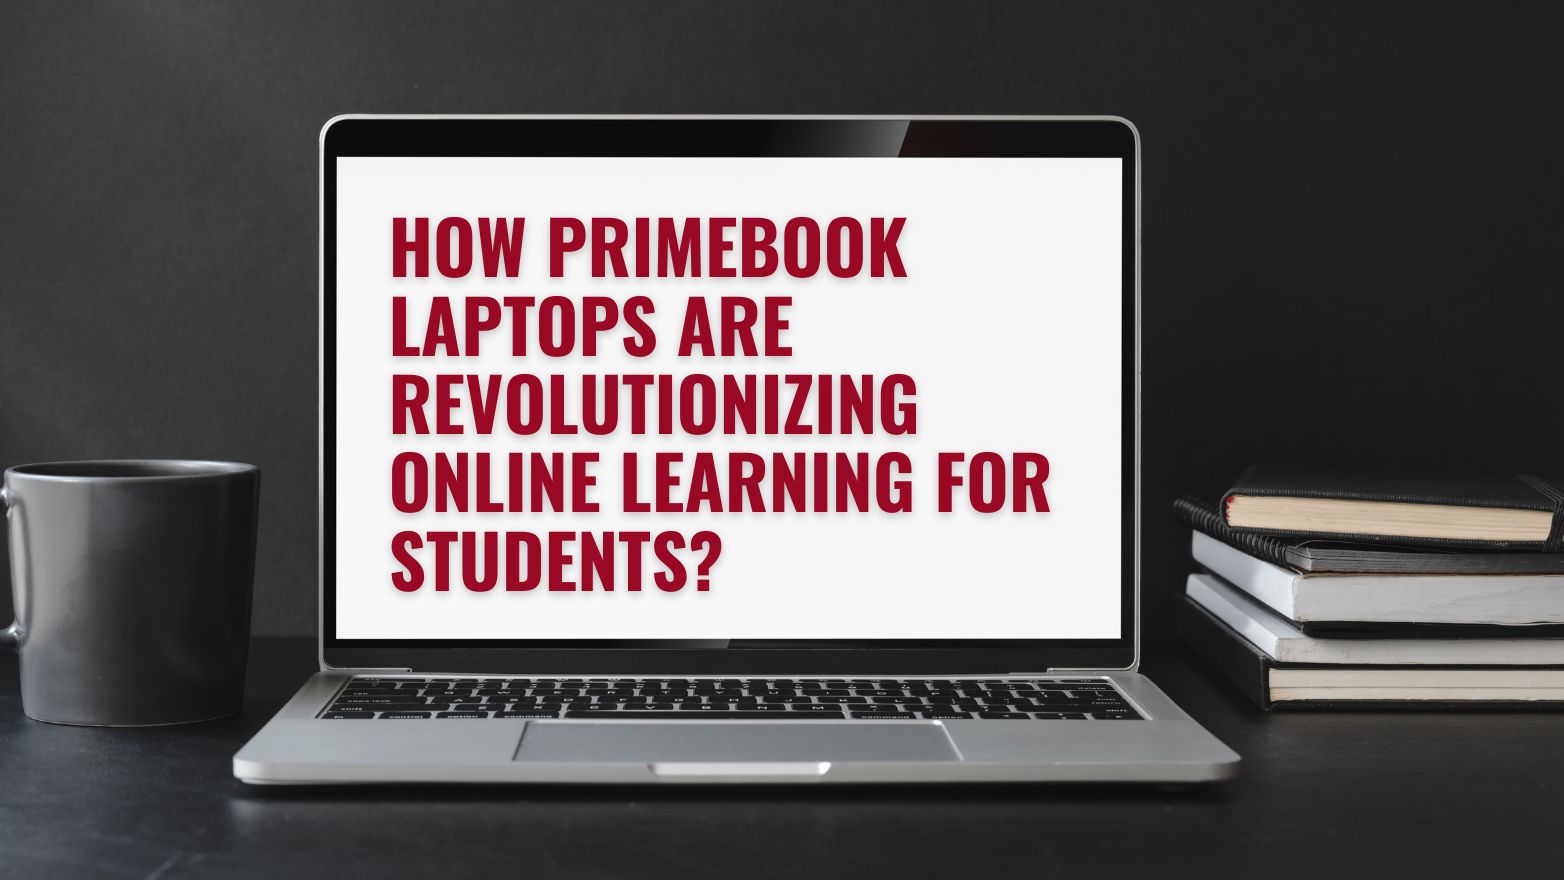 How are Primebook laptops revolutionizing online learning for students?